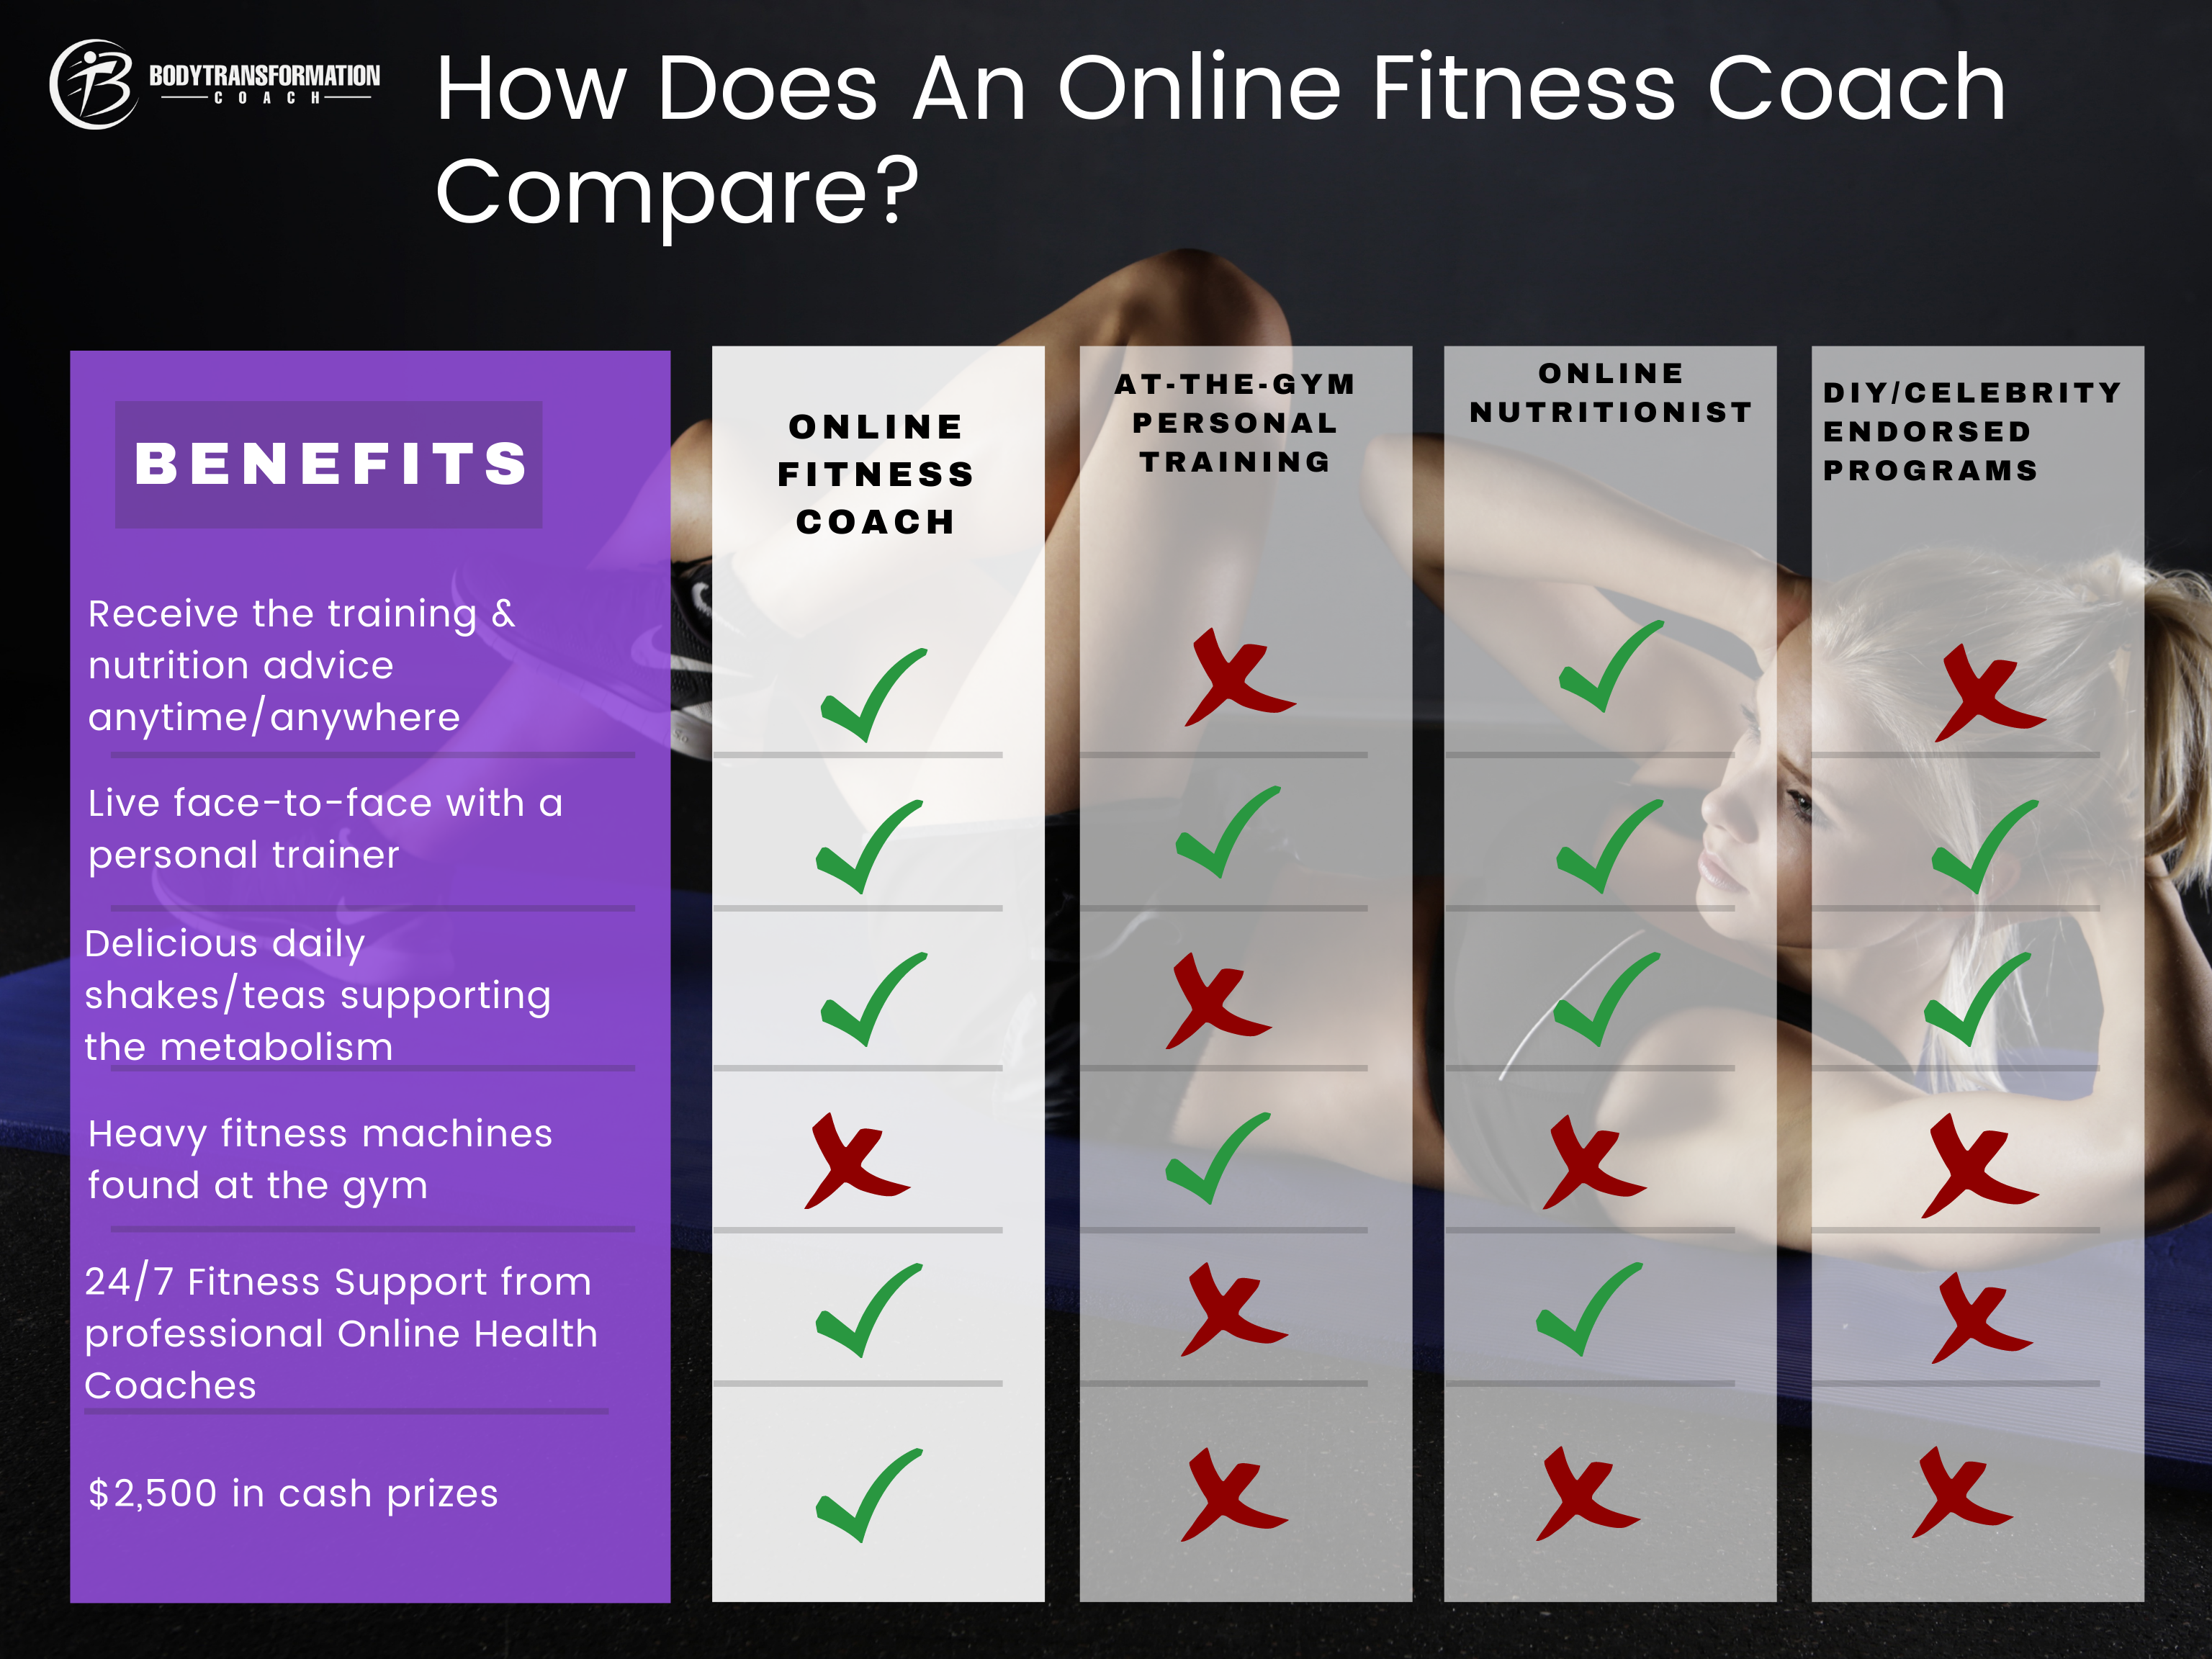 Why You Should Consider An Online Personal Trainer